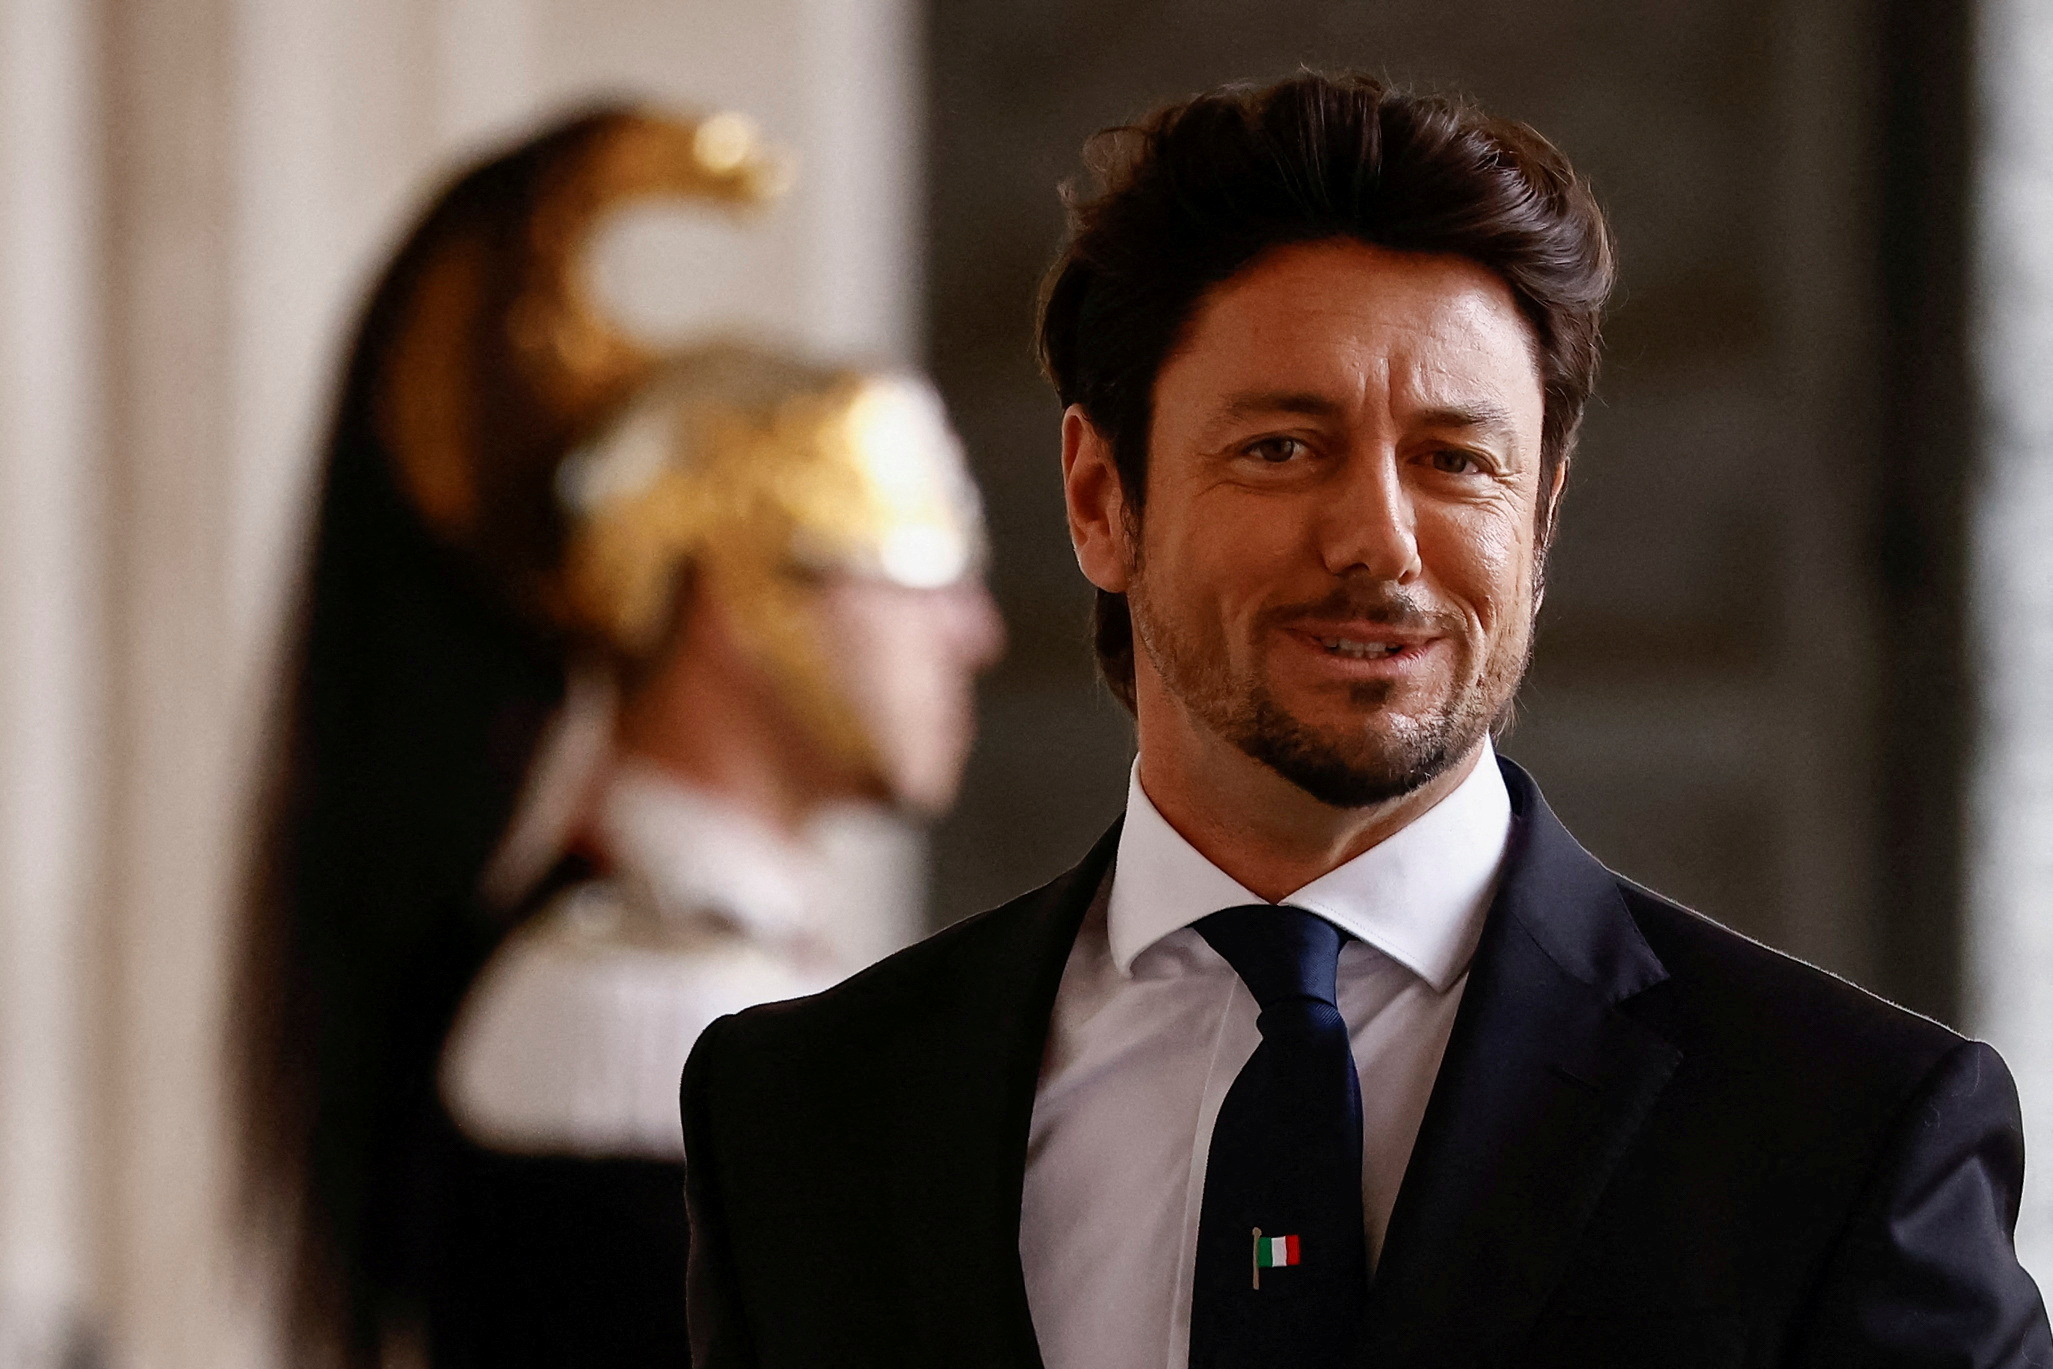 Giambruno attends Meloni's swearing-in ceremony at Quirinale Palace, in Rome